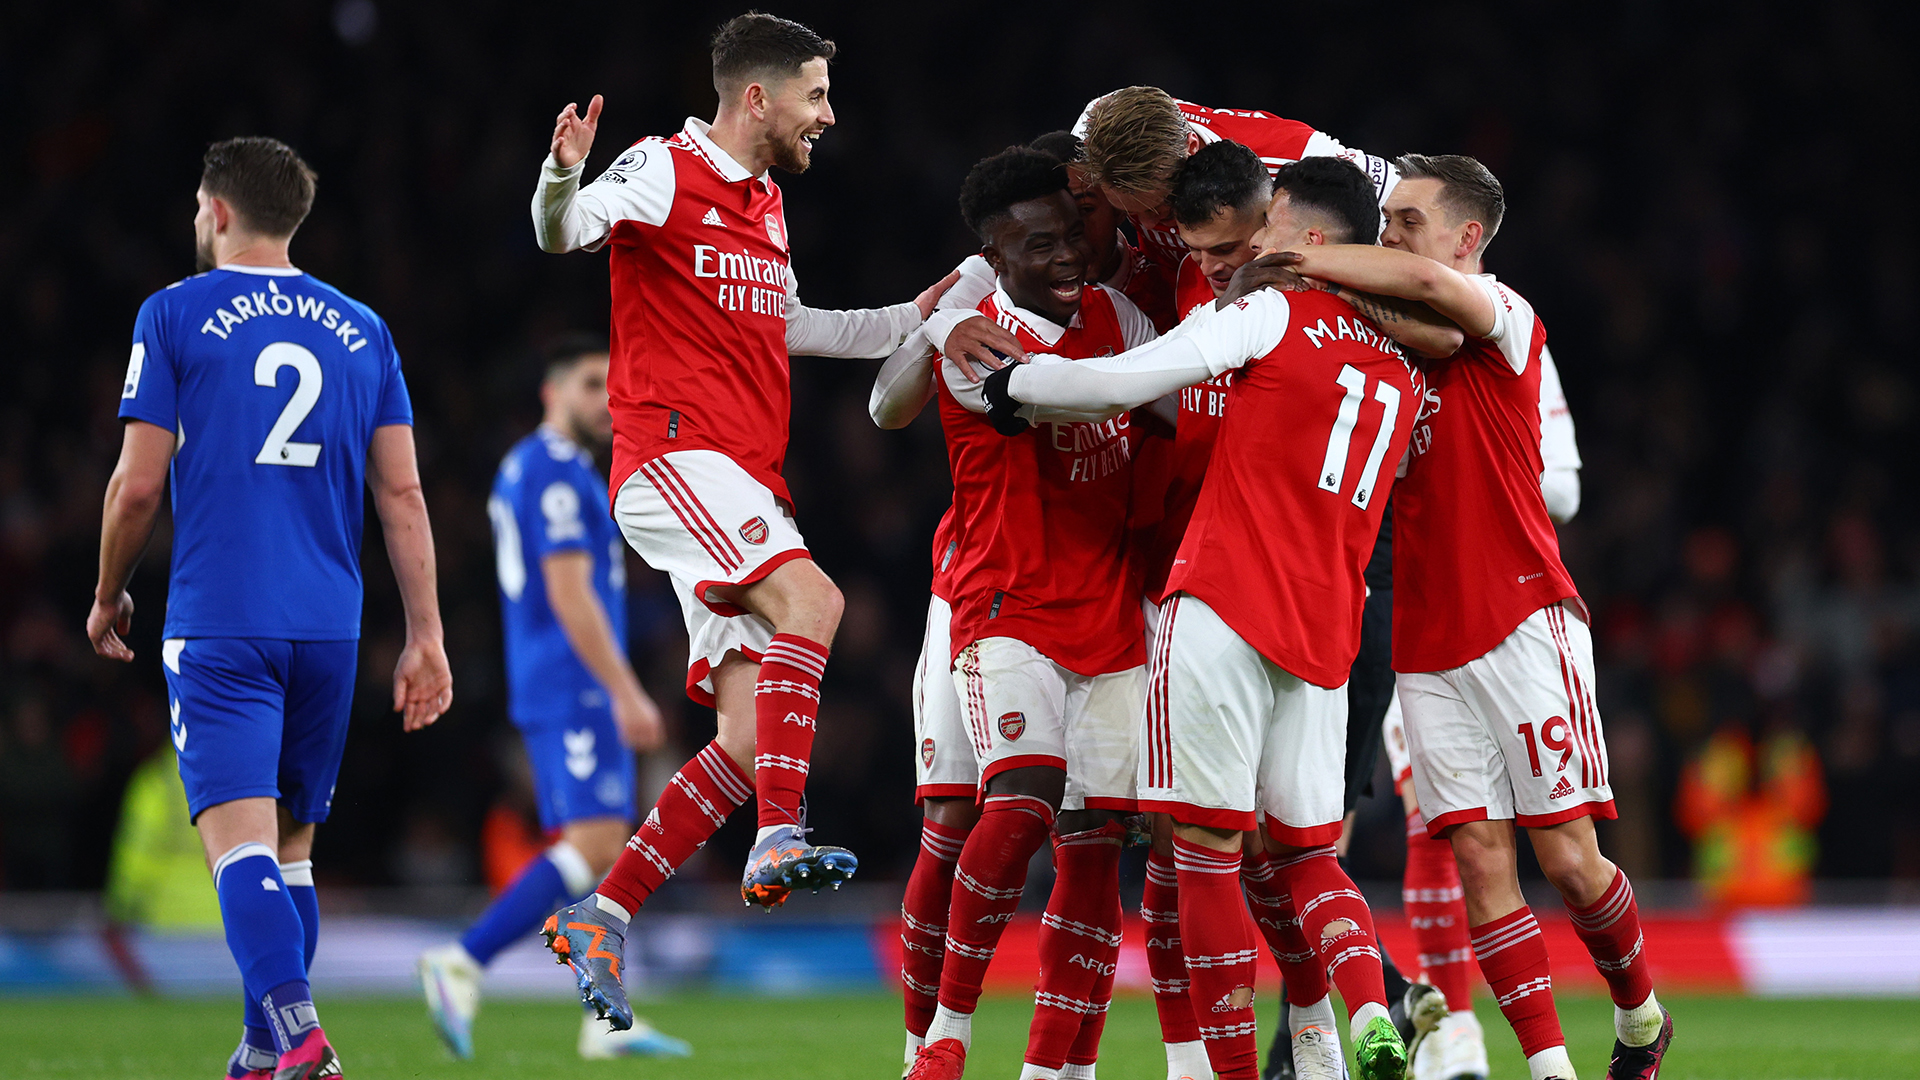 Gabriel Martinelli of Arsenal celebrates with teammates after scoring the team's second goal following the VAR check during the Premier League match between Arsenal FC and Everton FC at Emirates Stadium on March 01, 2023 in London, England.